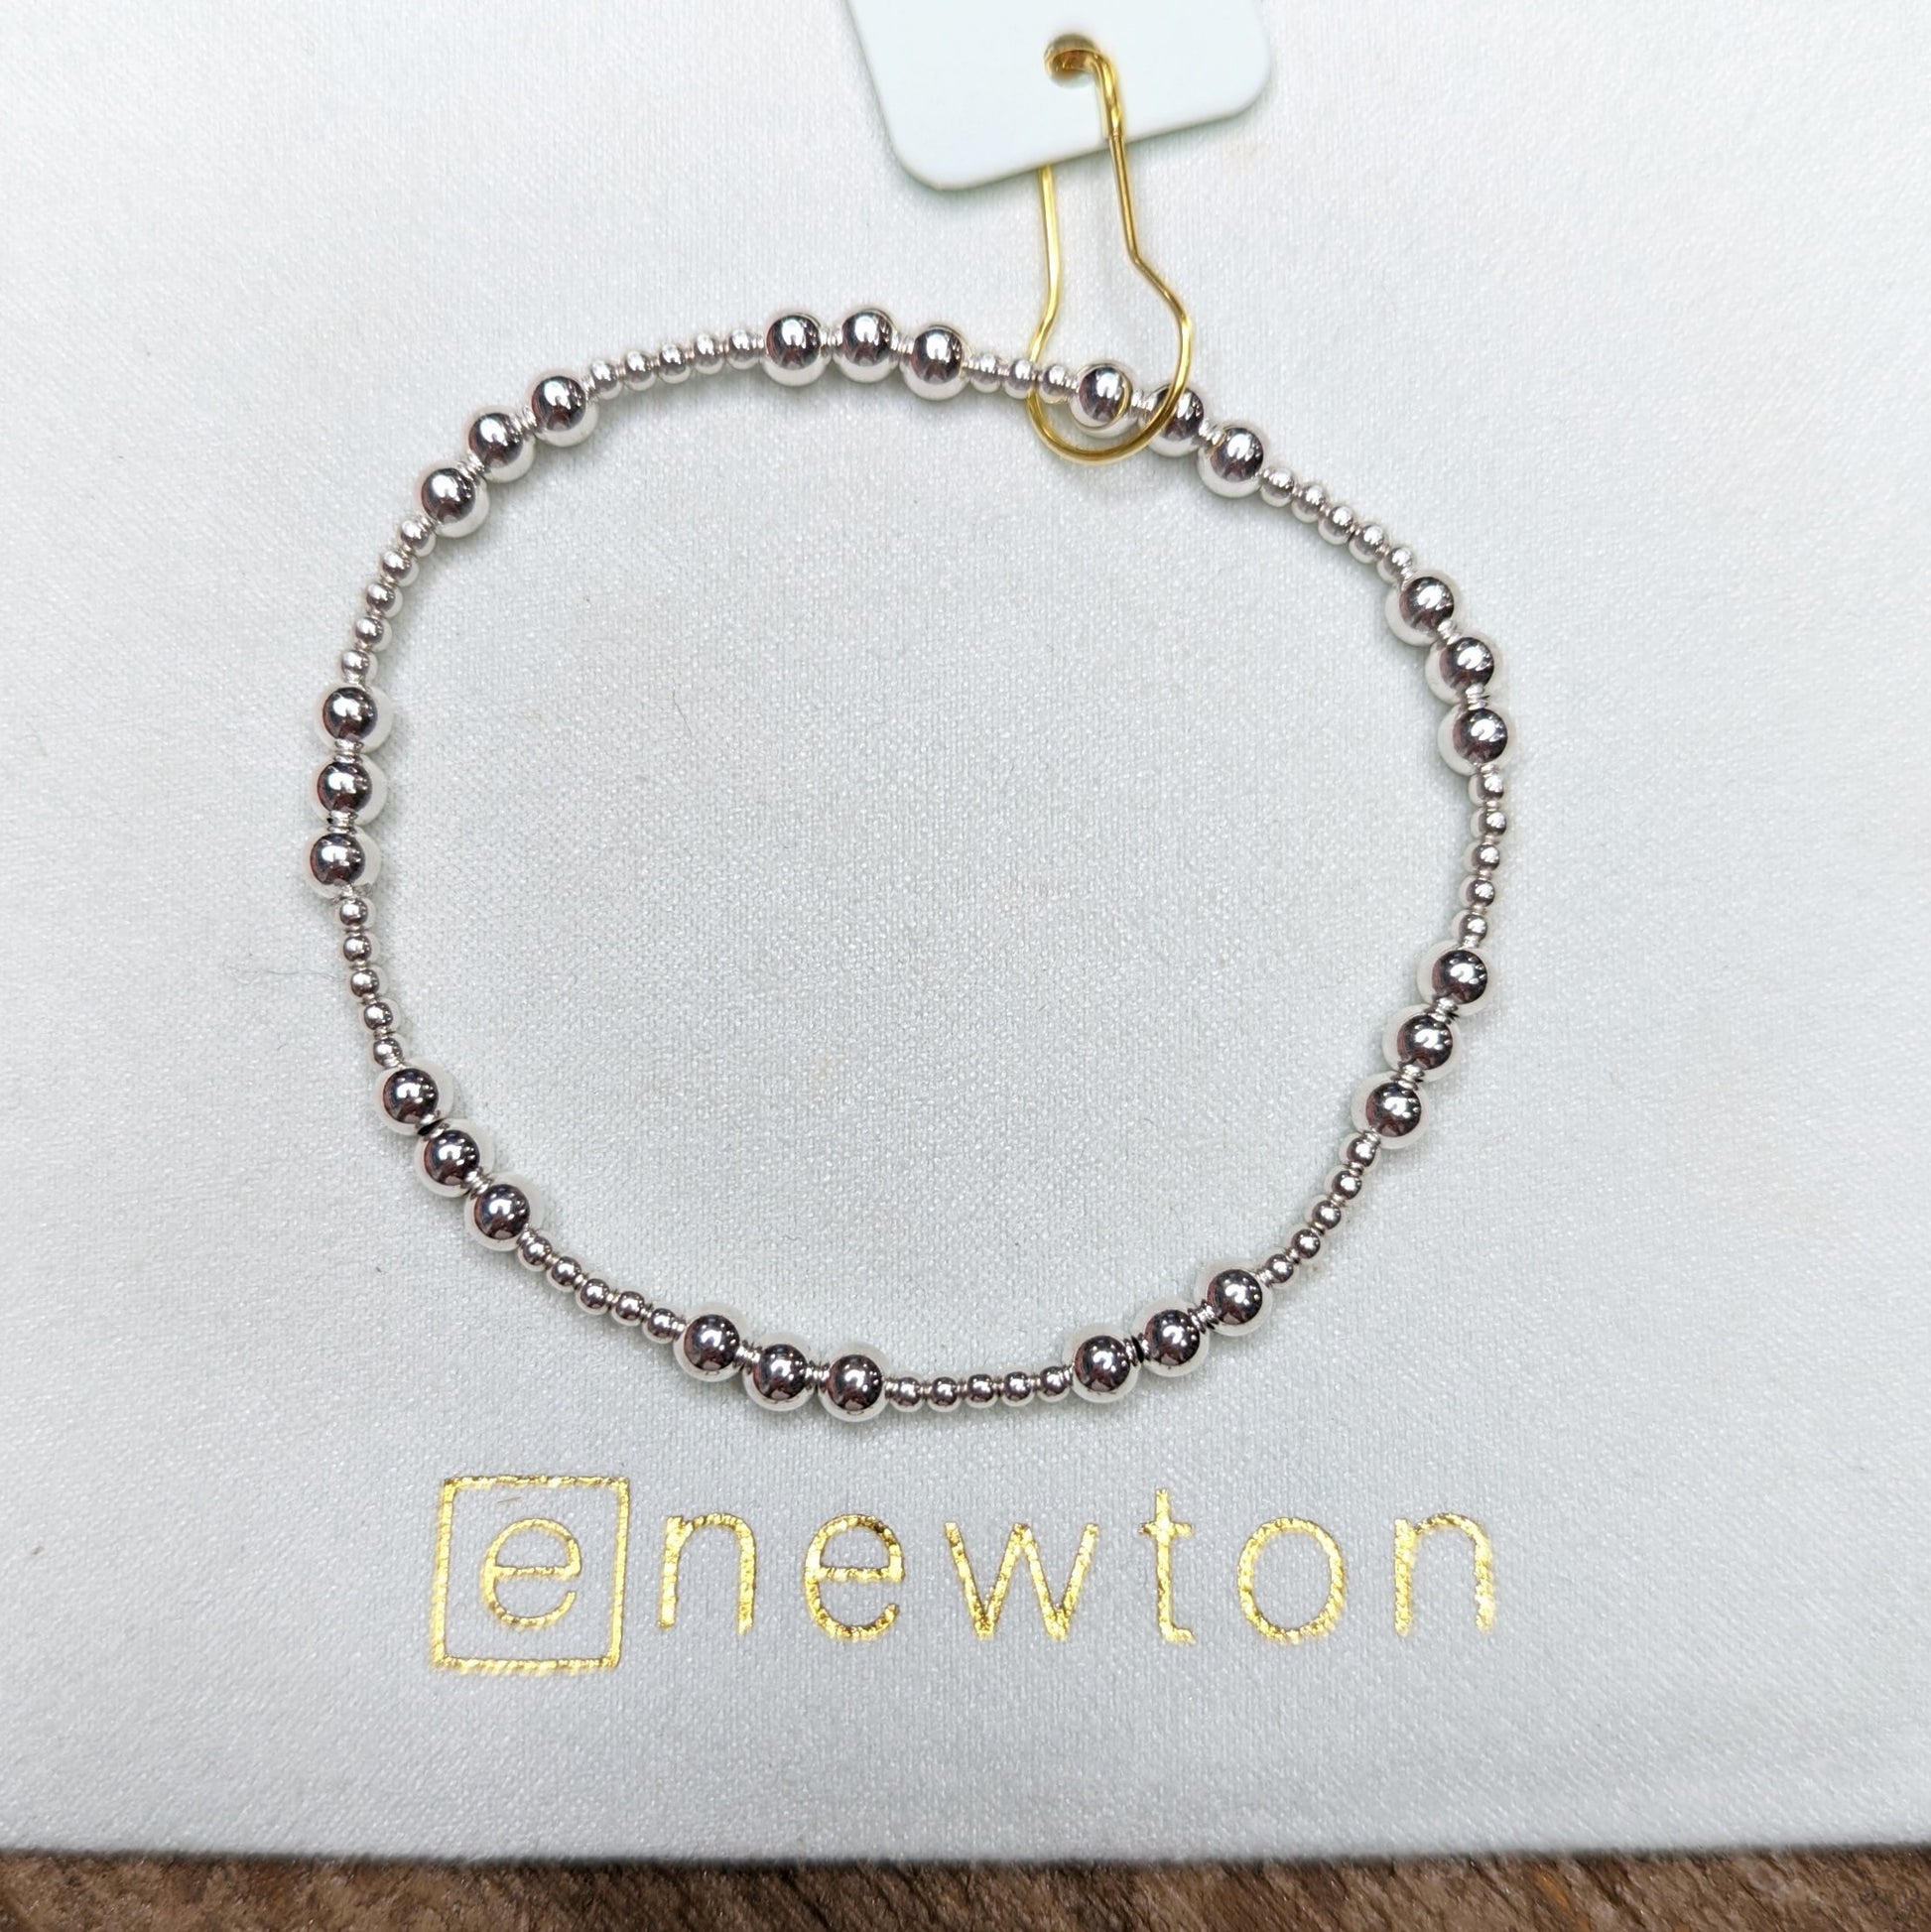 Classic sterling silver 4mm Joy bracelet by eNewton. By The Painted Cottage in Edgewater, MD